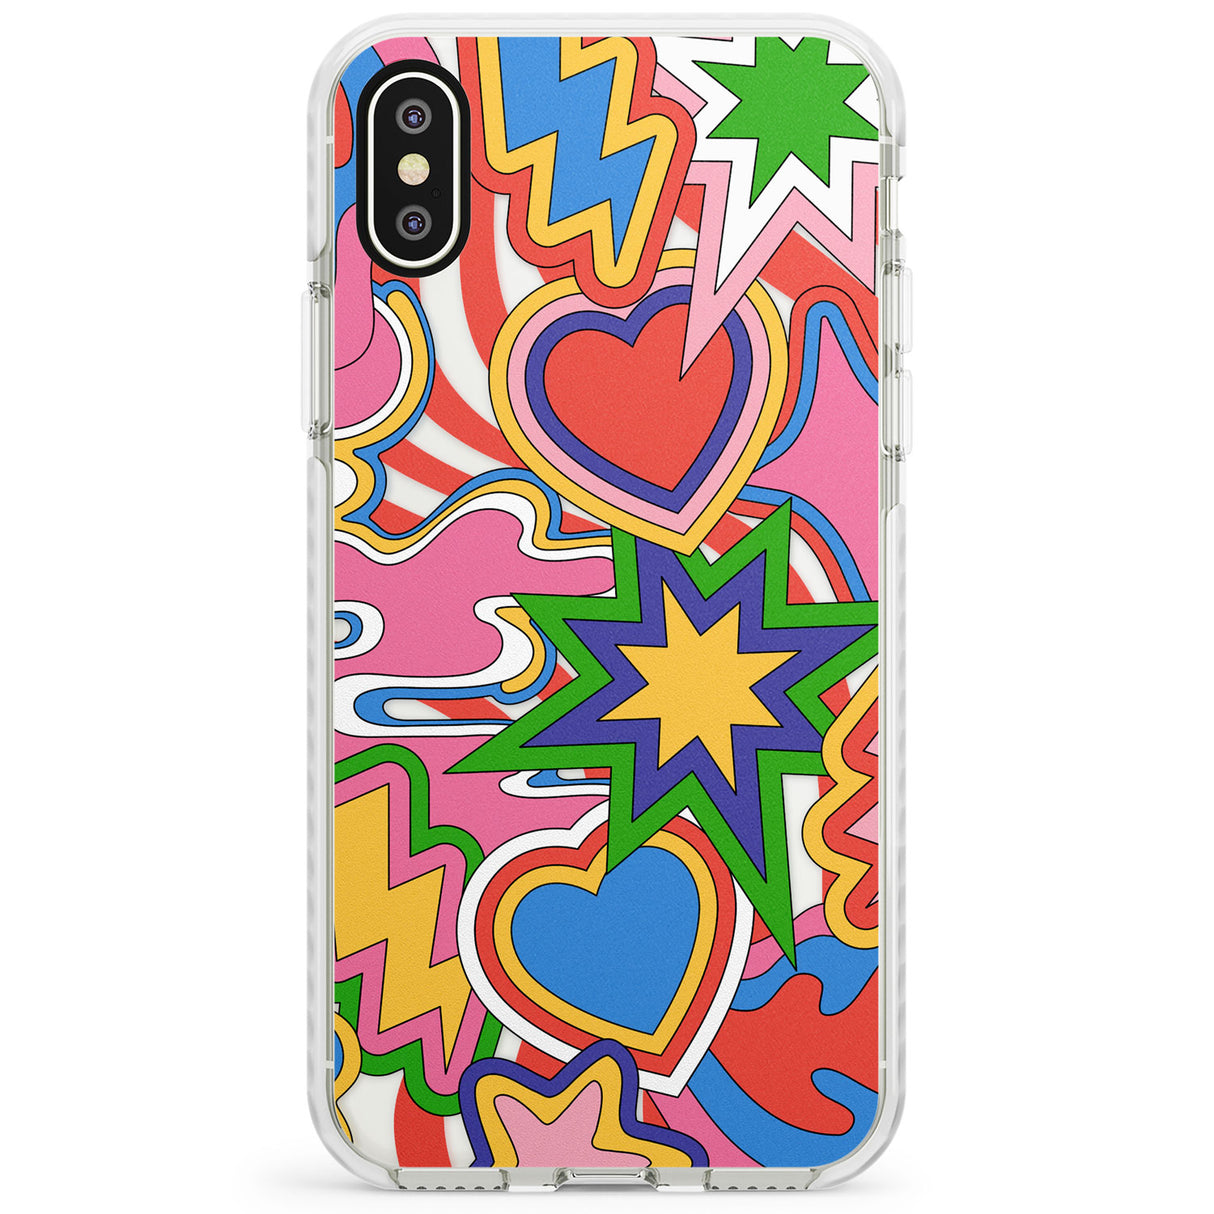 Psychedelic Pop Art Explosion Impact Phone Case for iPhone X XS Max XR